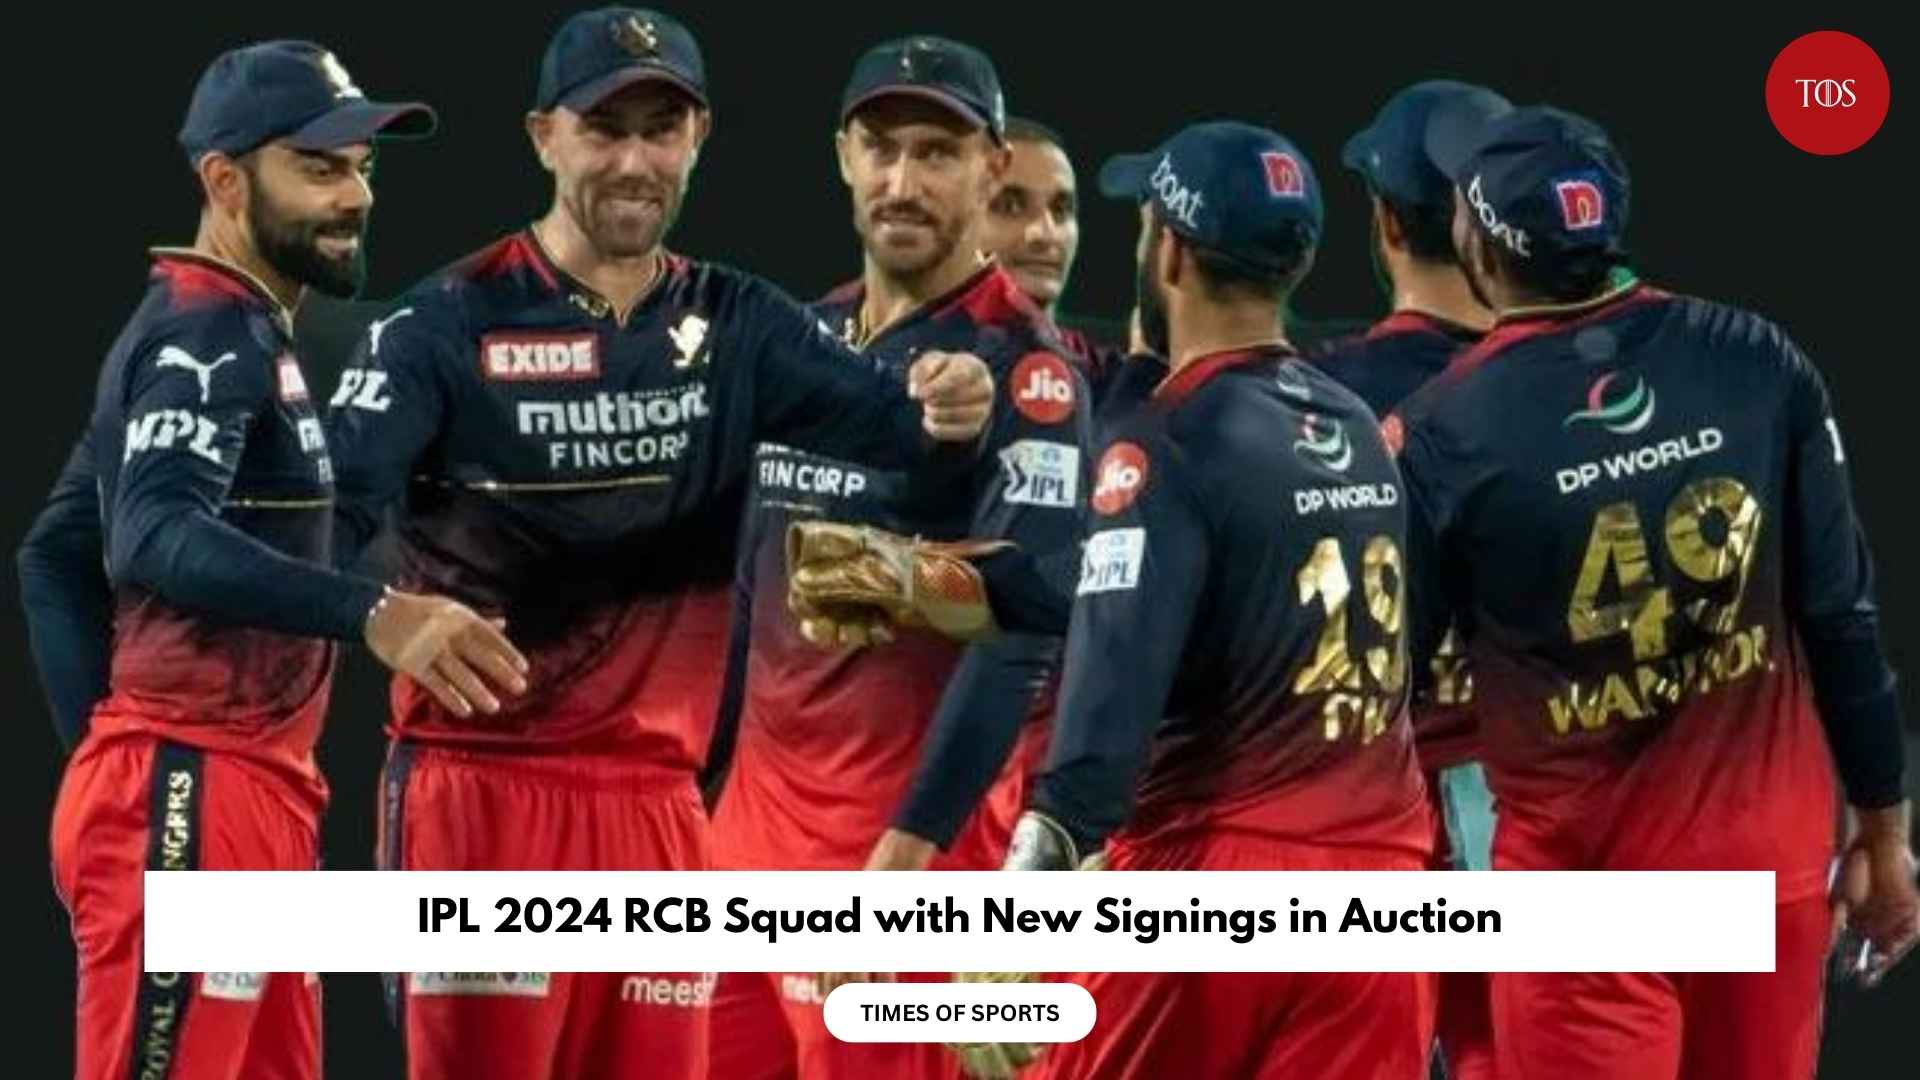 IPL 2024 RCB Squad with New Signings in Auction